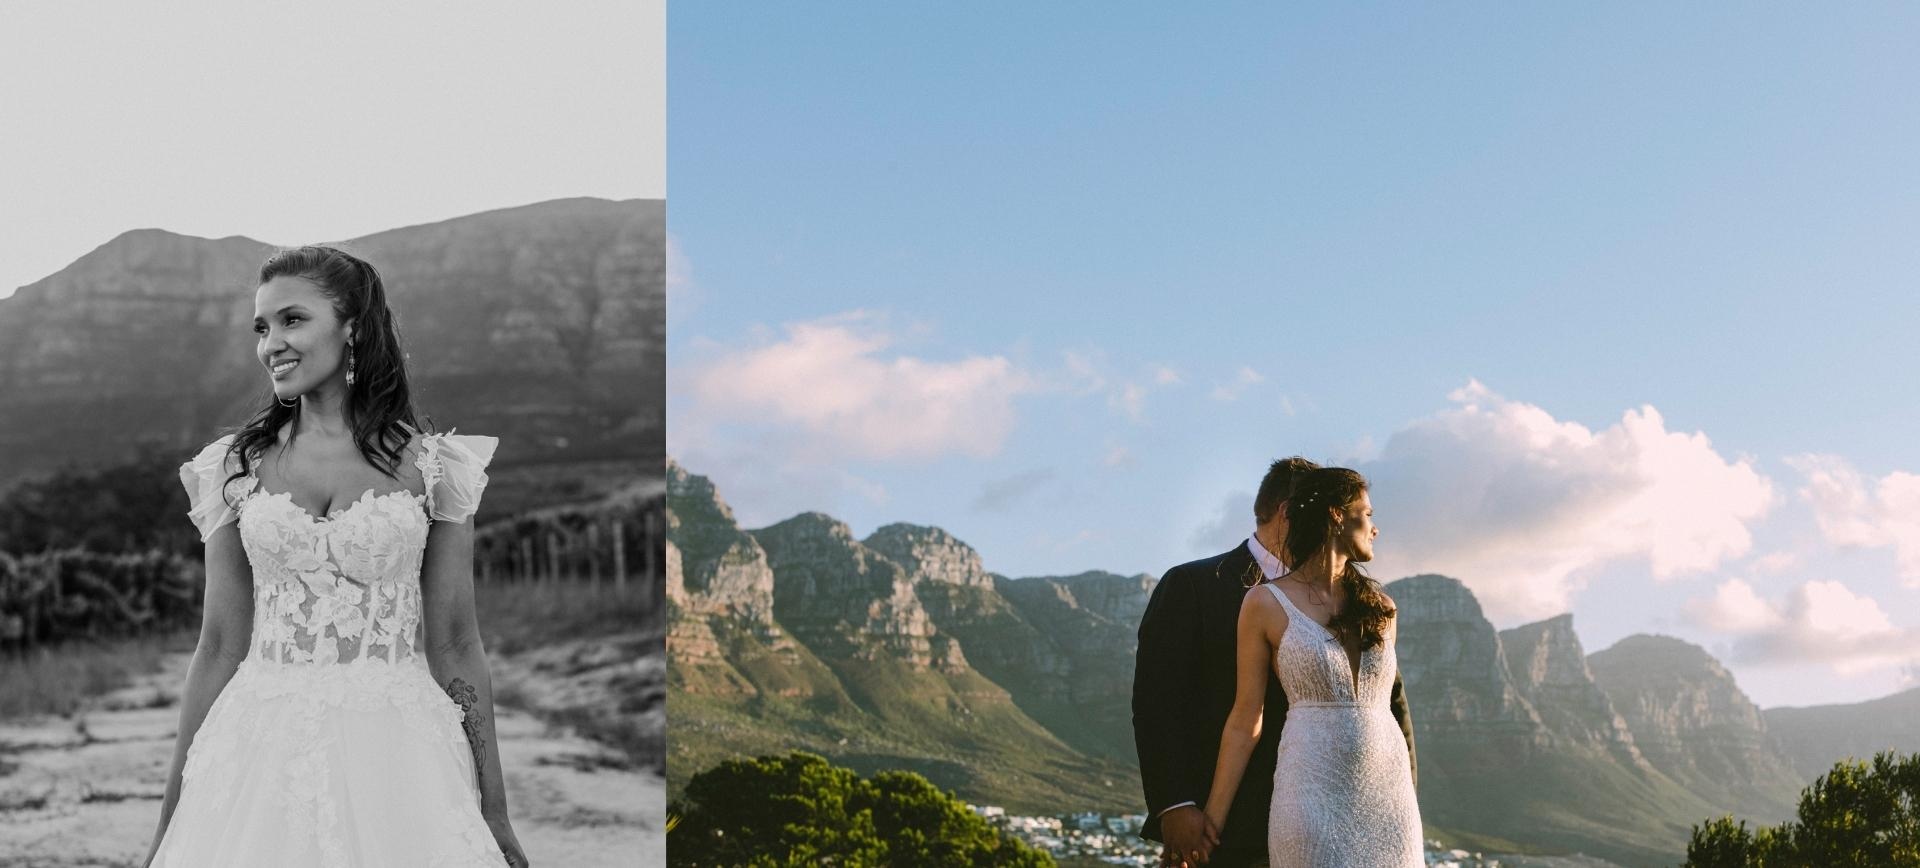 elopement packages cape town, south africa